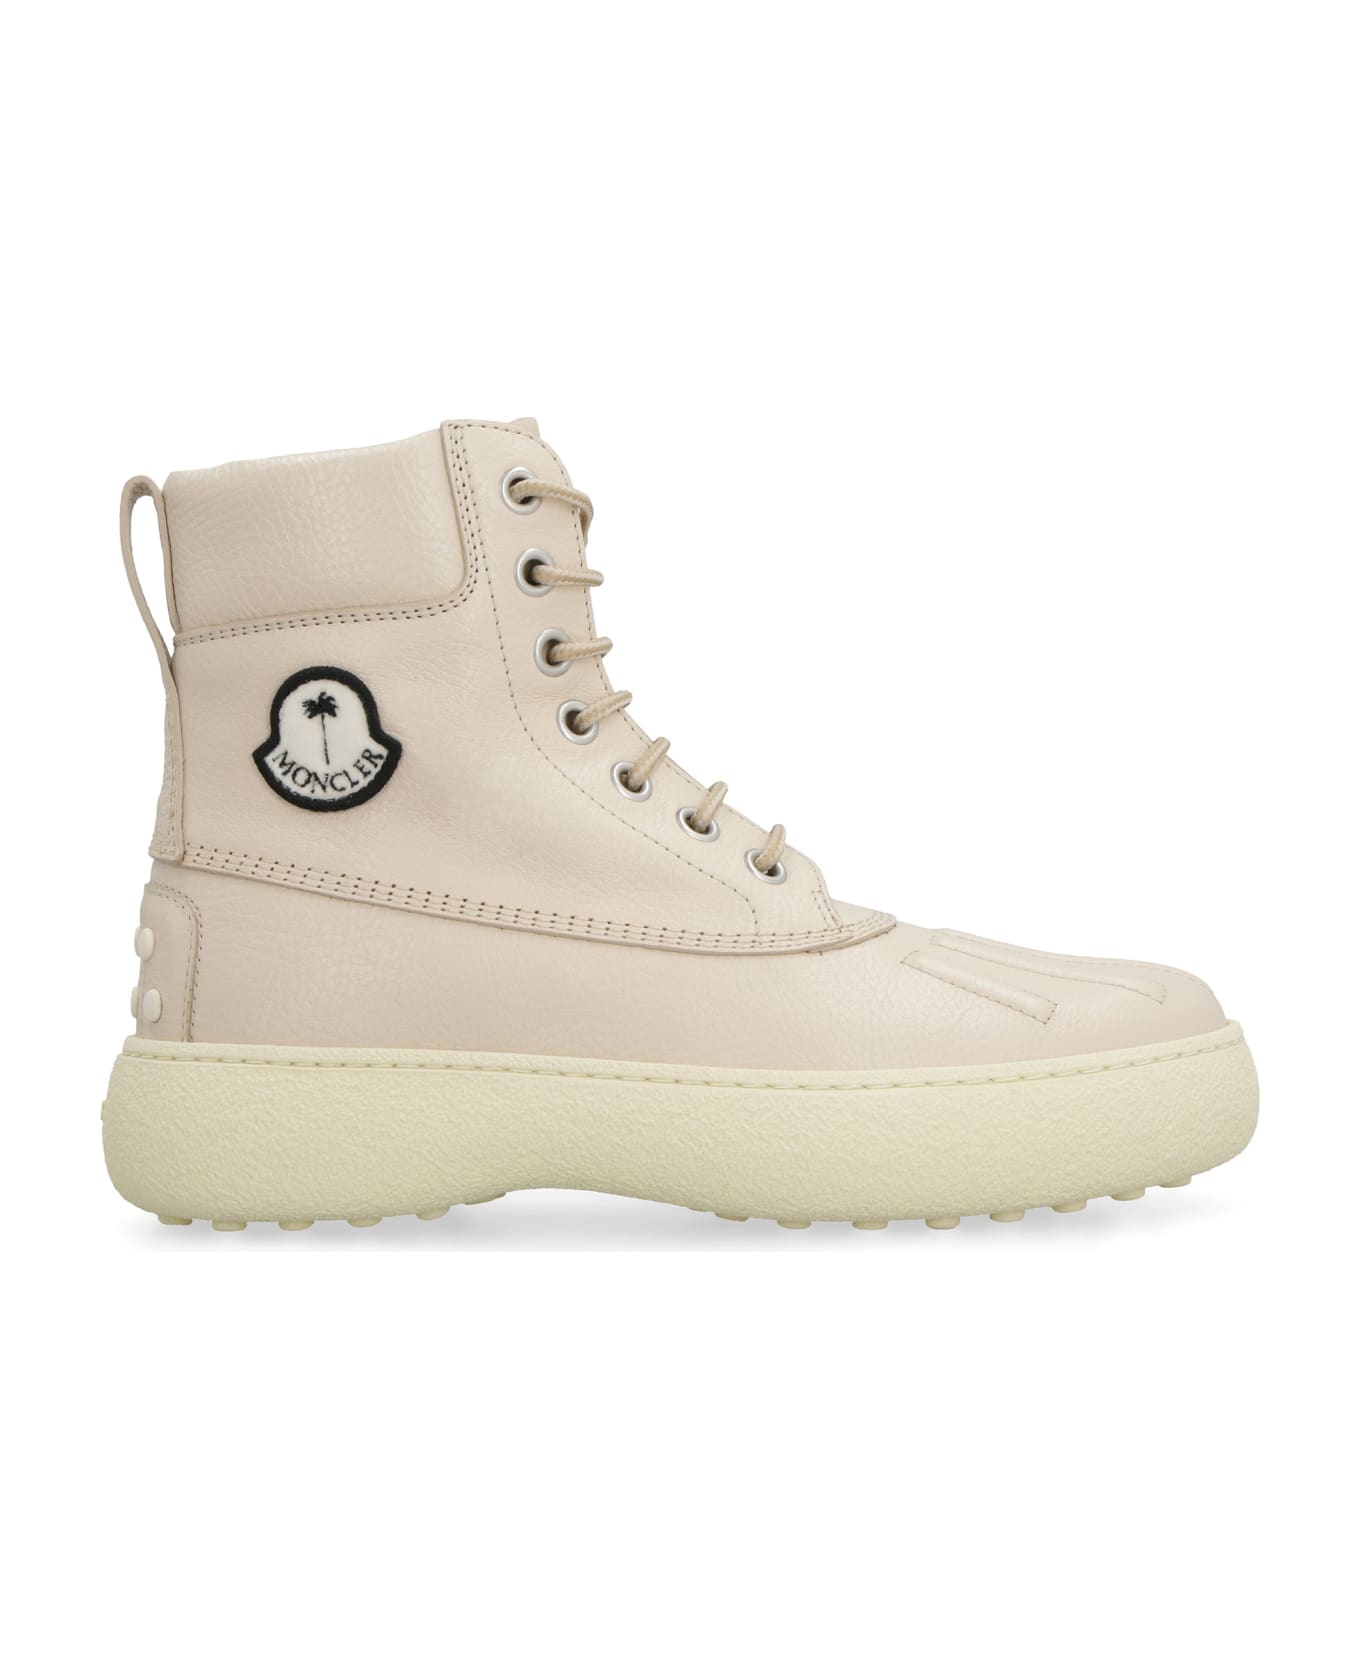 Moncler Genius Tod's X 8 Moncler Palm Angels - W.g. Lace-up Ankle Boot - Beige